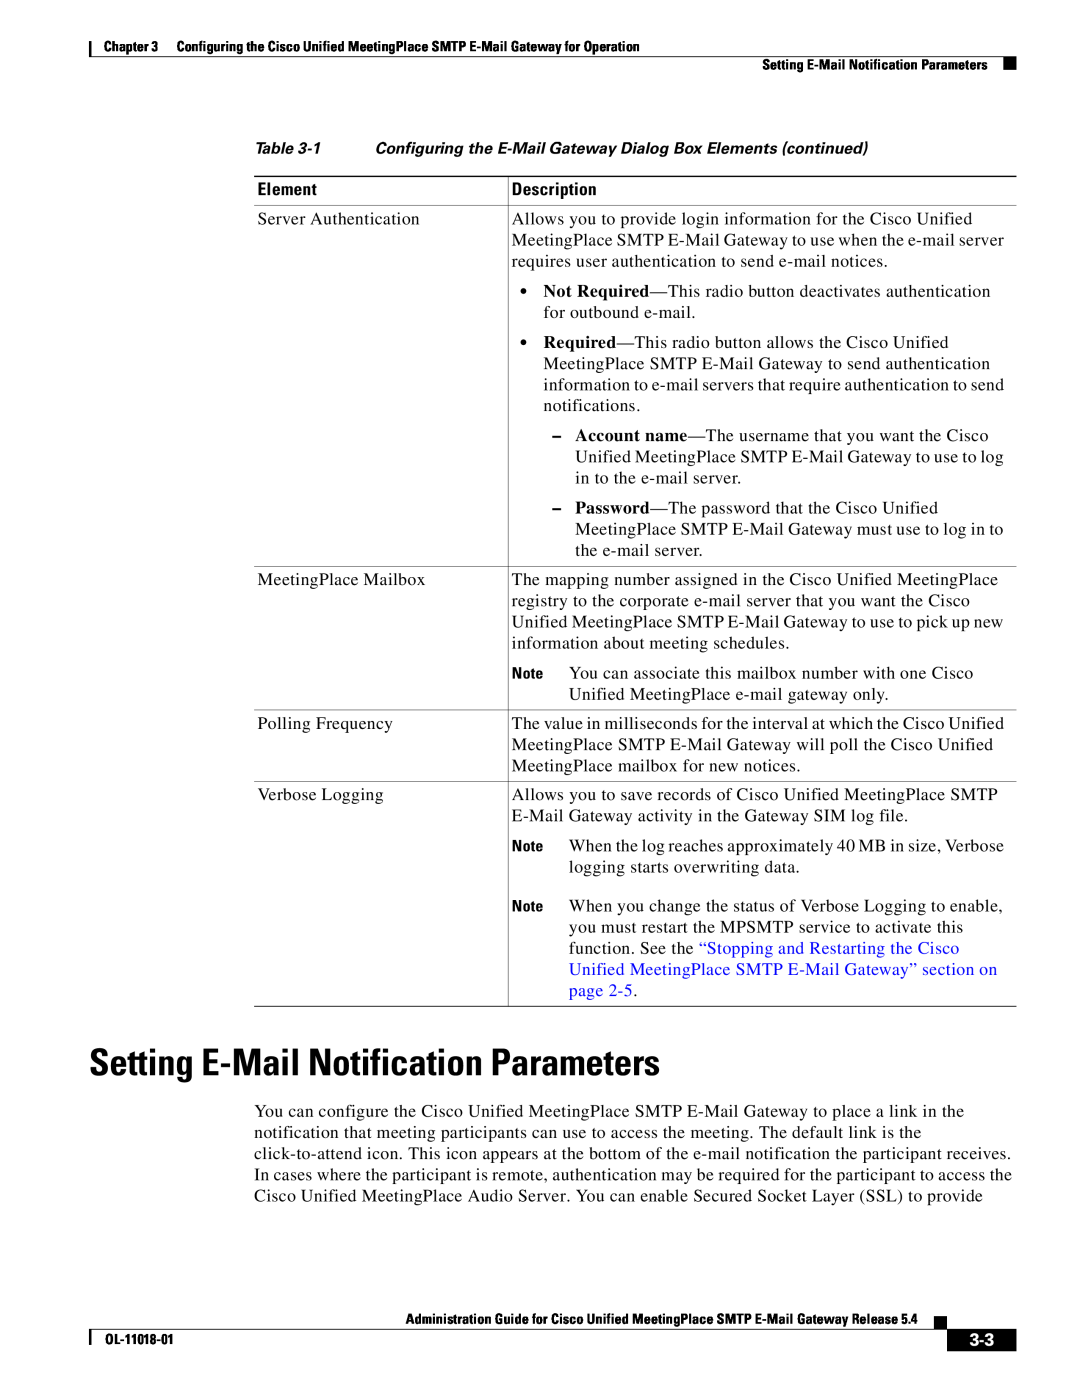 Cisco Systems SMTP manual Element, Description, function. See the “Stopping and Restarting the Cisco, page 